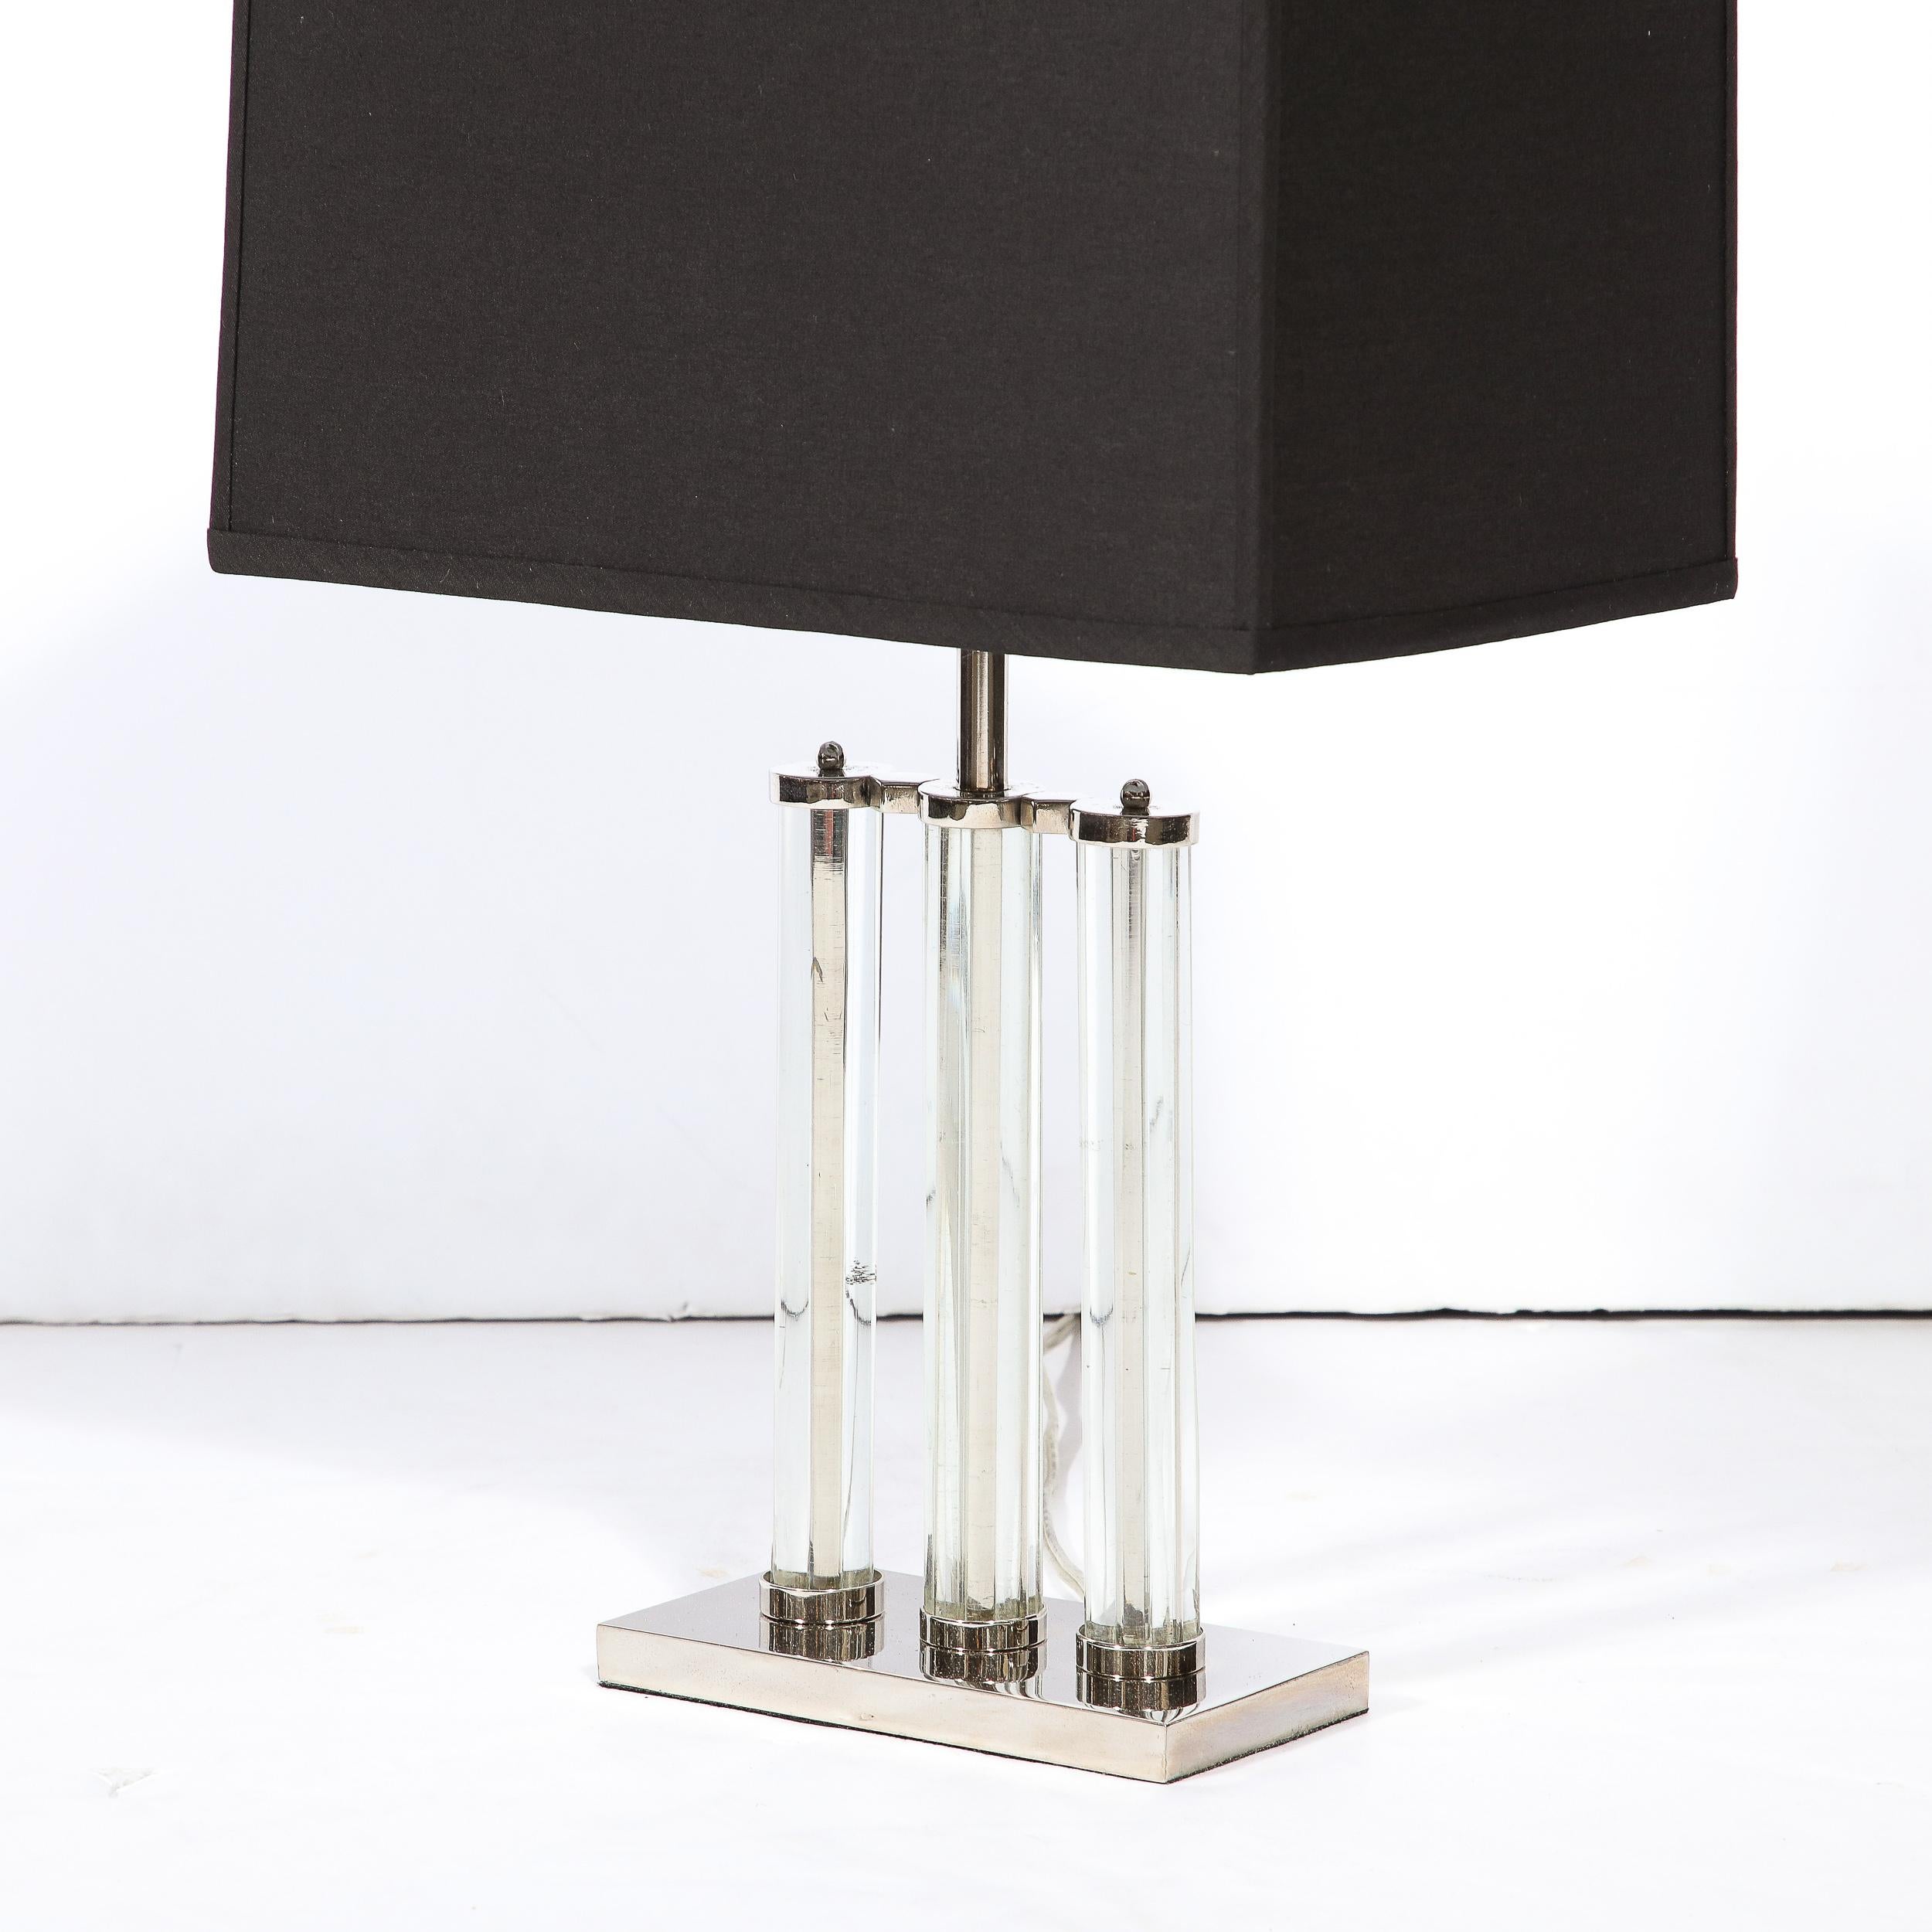 Art Deco Streamlined Cylindrical Form Table Lamp in Glass & Polished Nickel In Excellent Condition For Sale In New York, NY